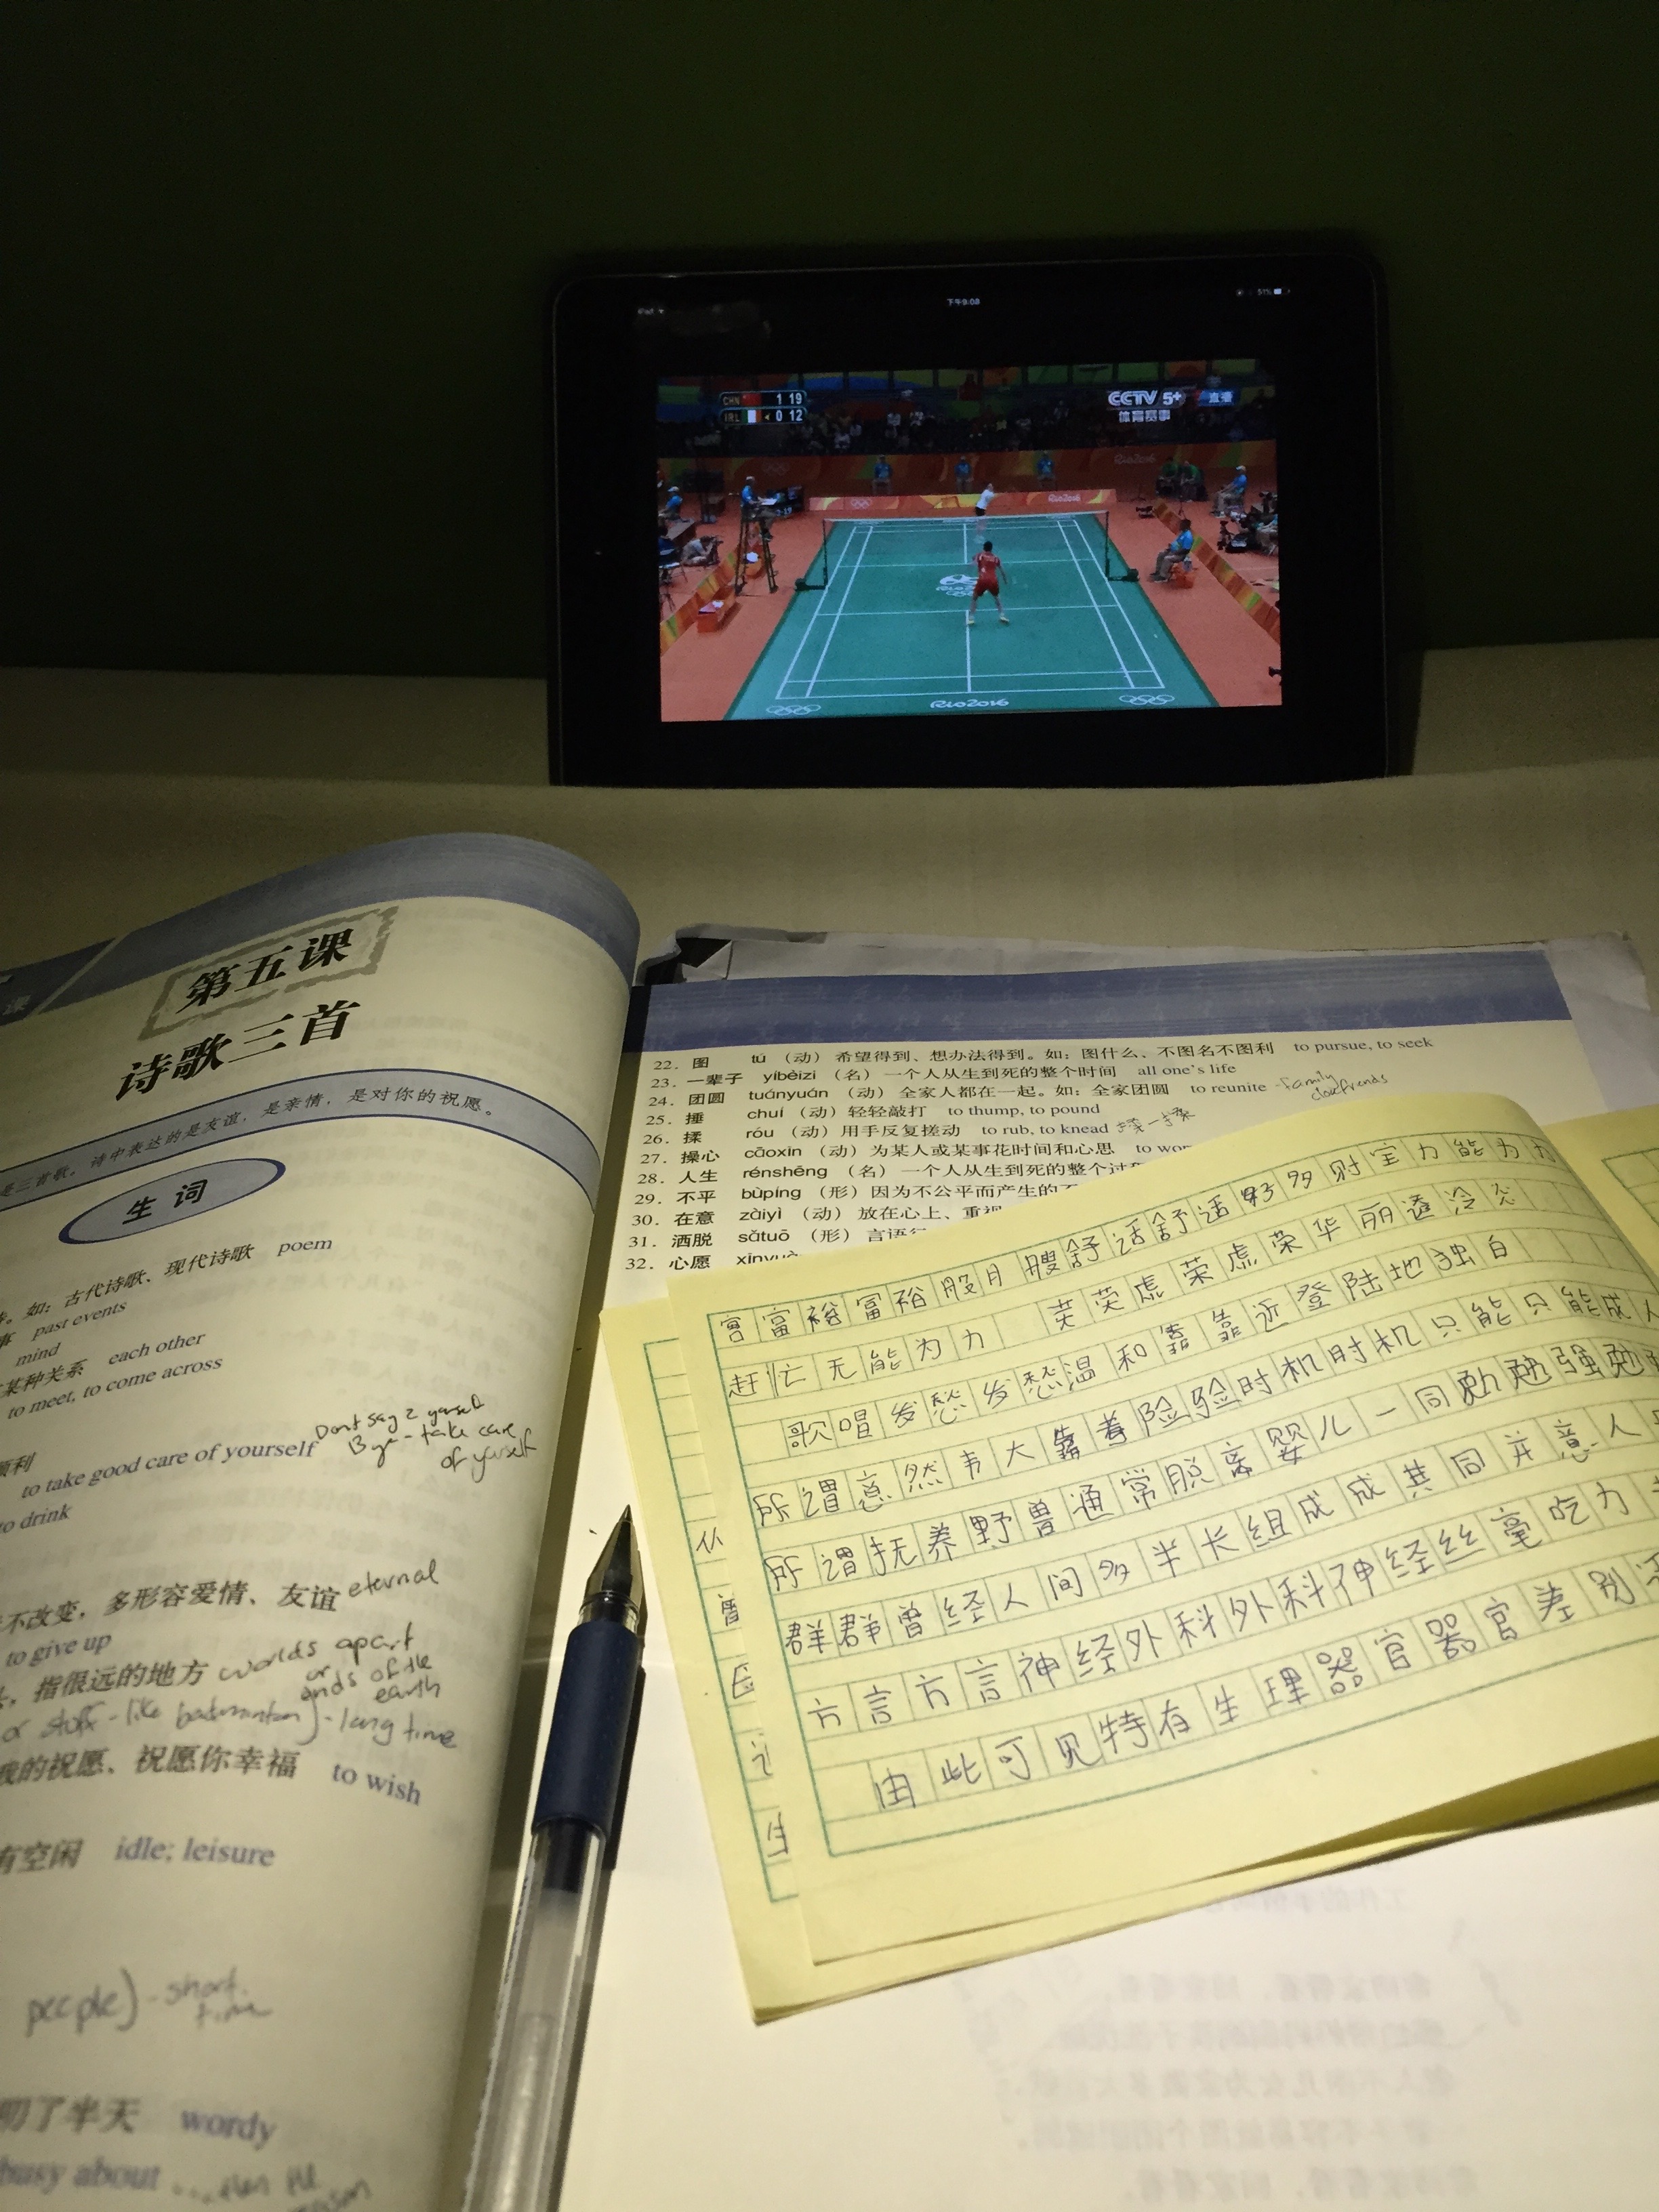 Olympic badminton and studying chinese